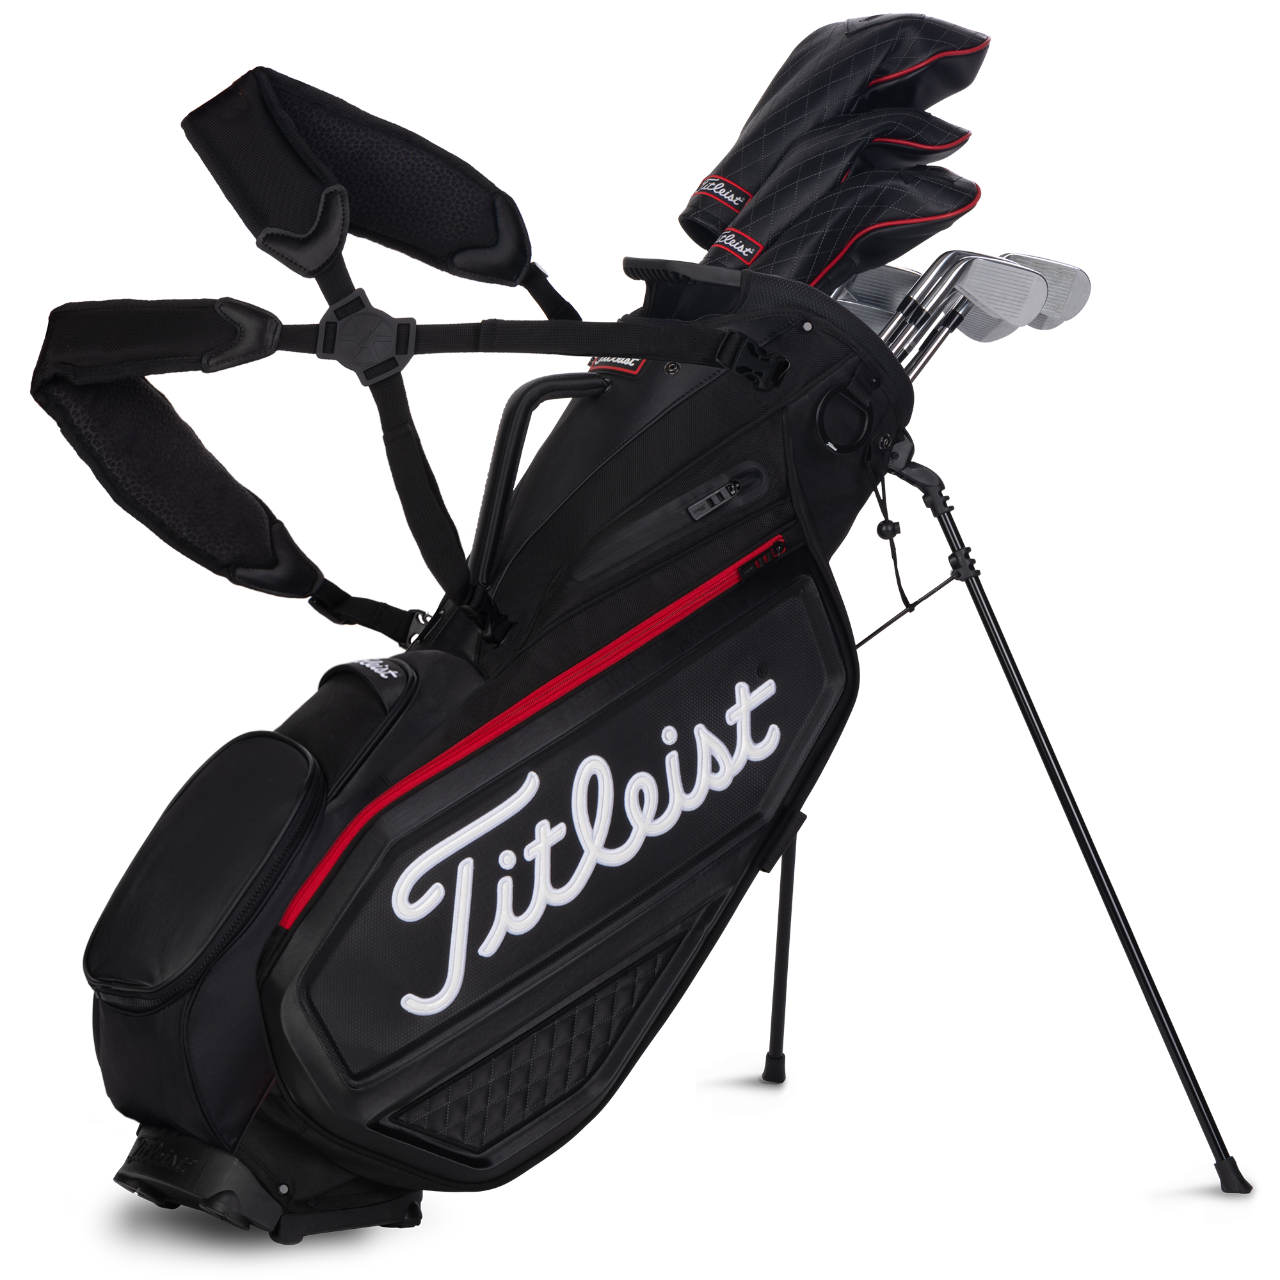 Callaway Golf X Series Stand Bag 2019 : Amazon.co.uk: Sports & Outdoors